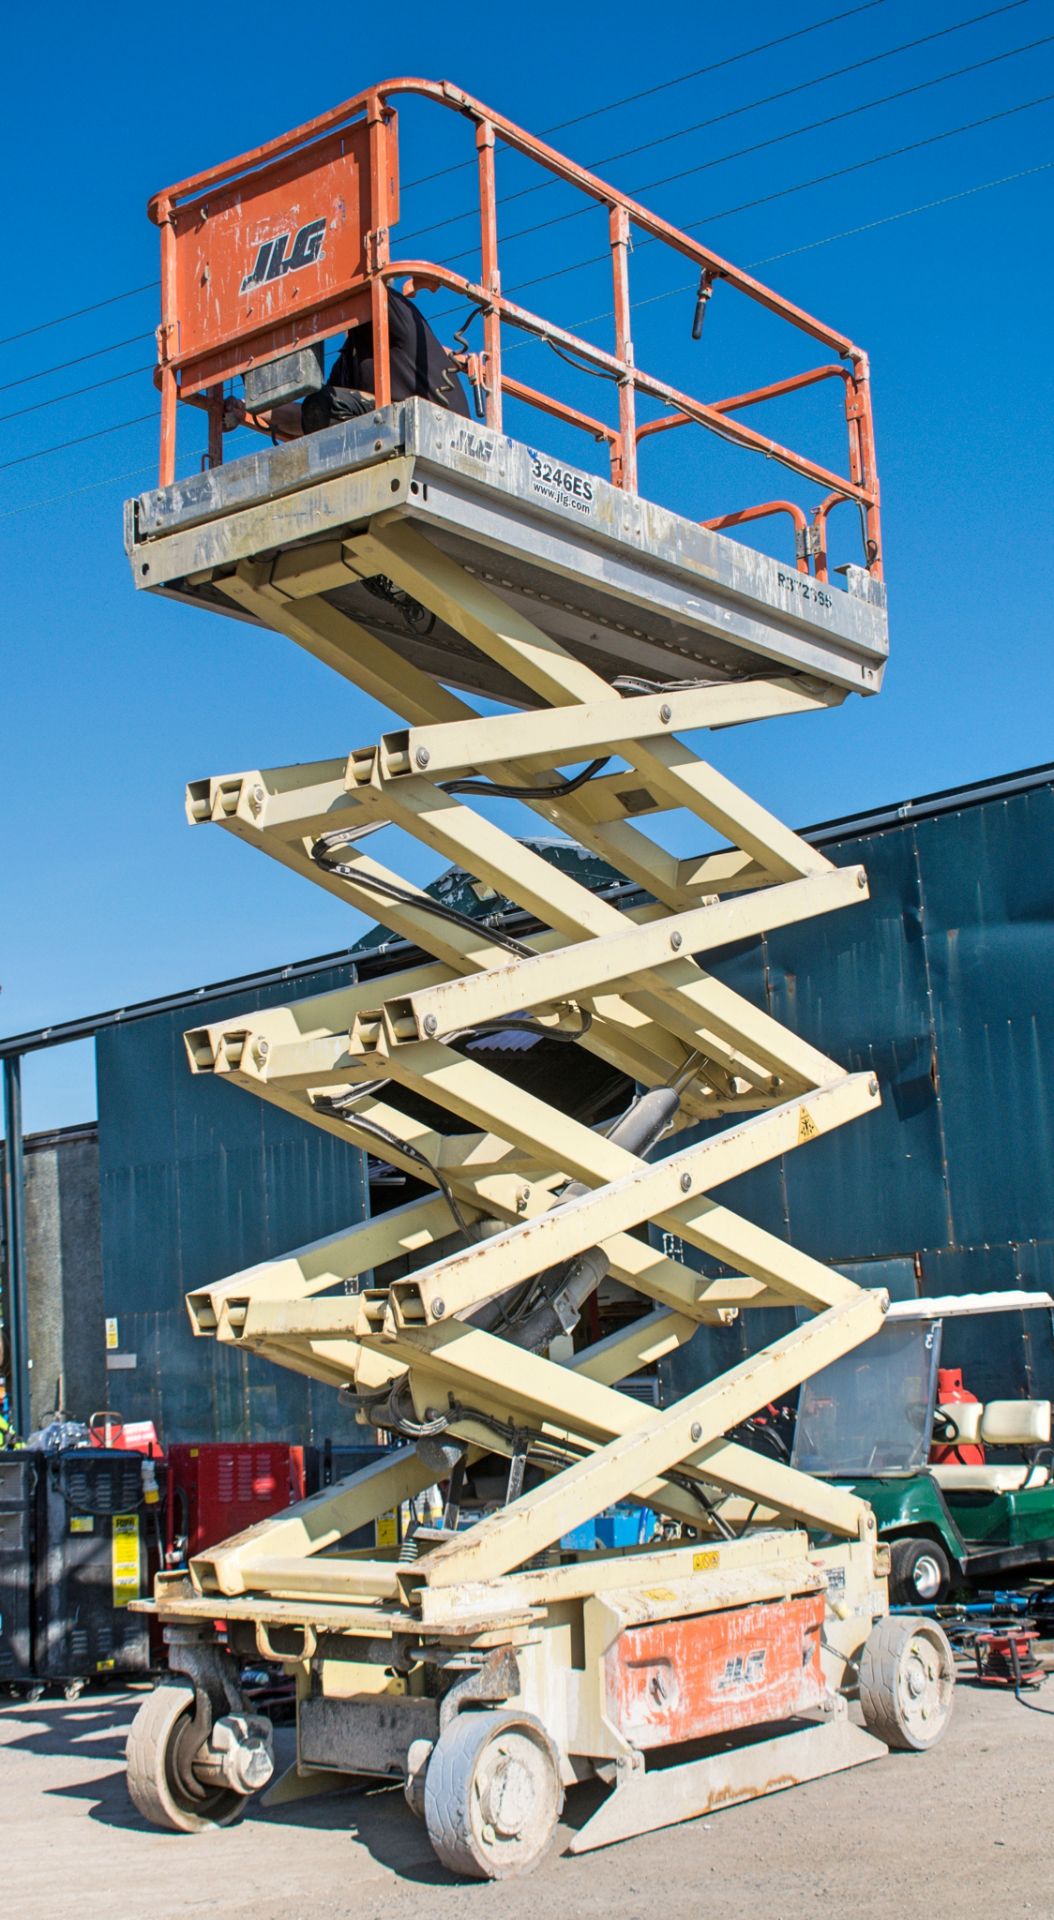 JLG 3246ES battery electric scissor lift Year: 2011 S/N: 024366 Recorded Hours: 212 R372365 - Image 7 of 9